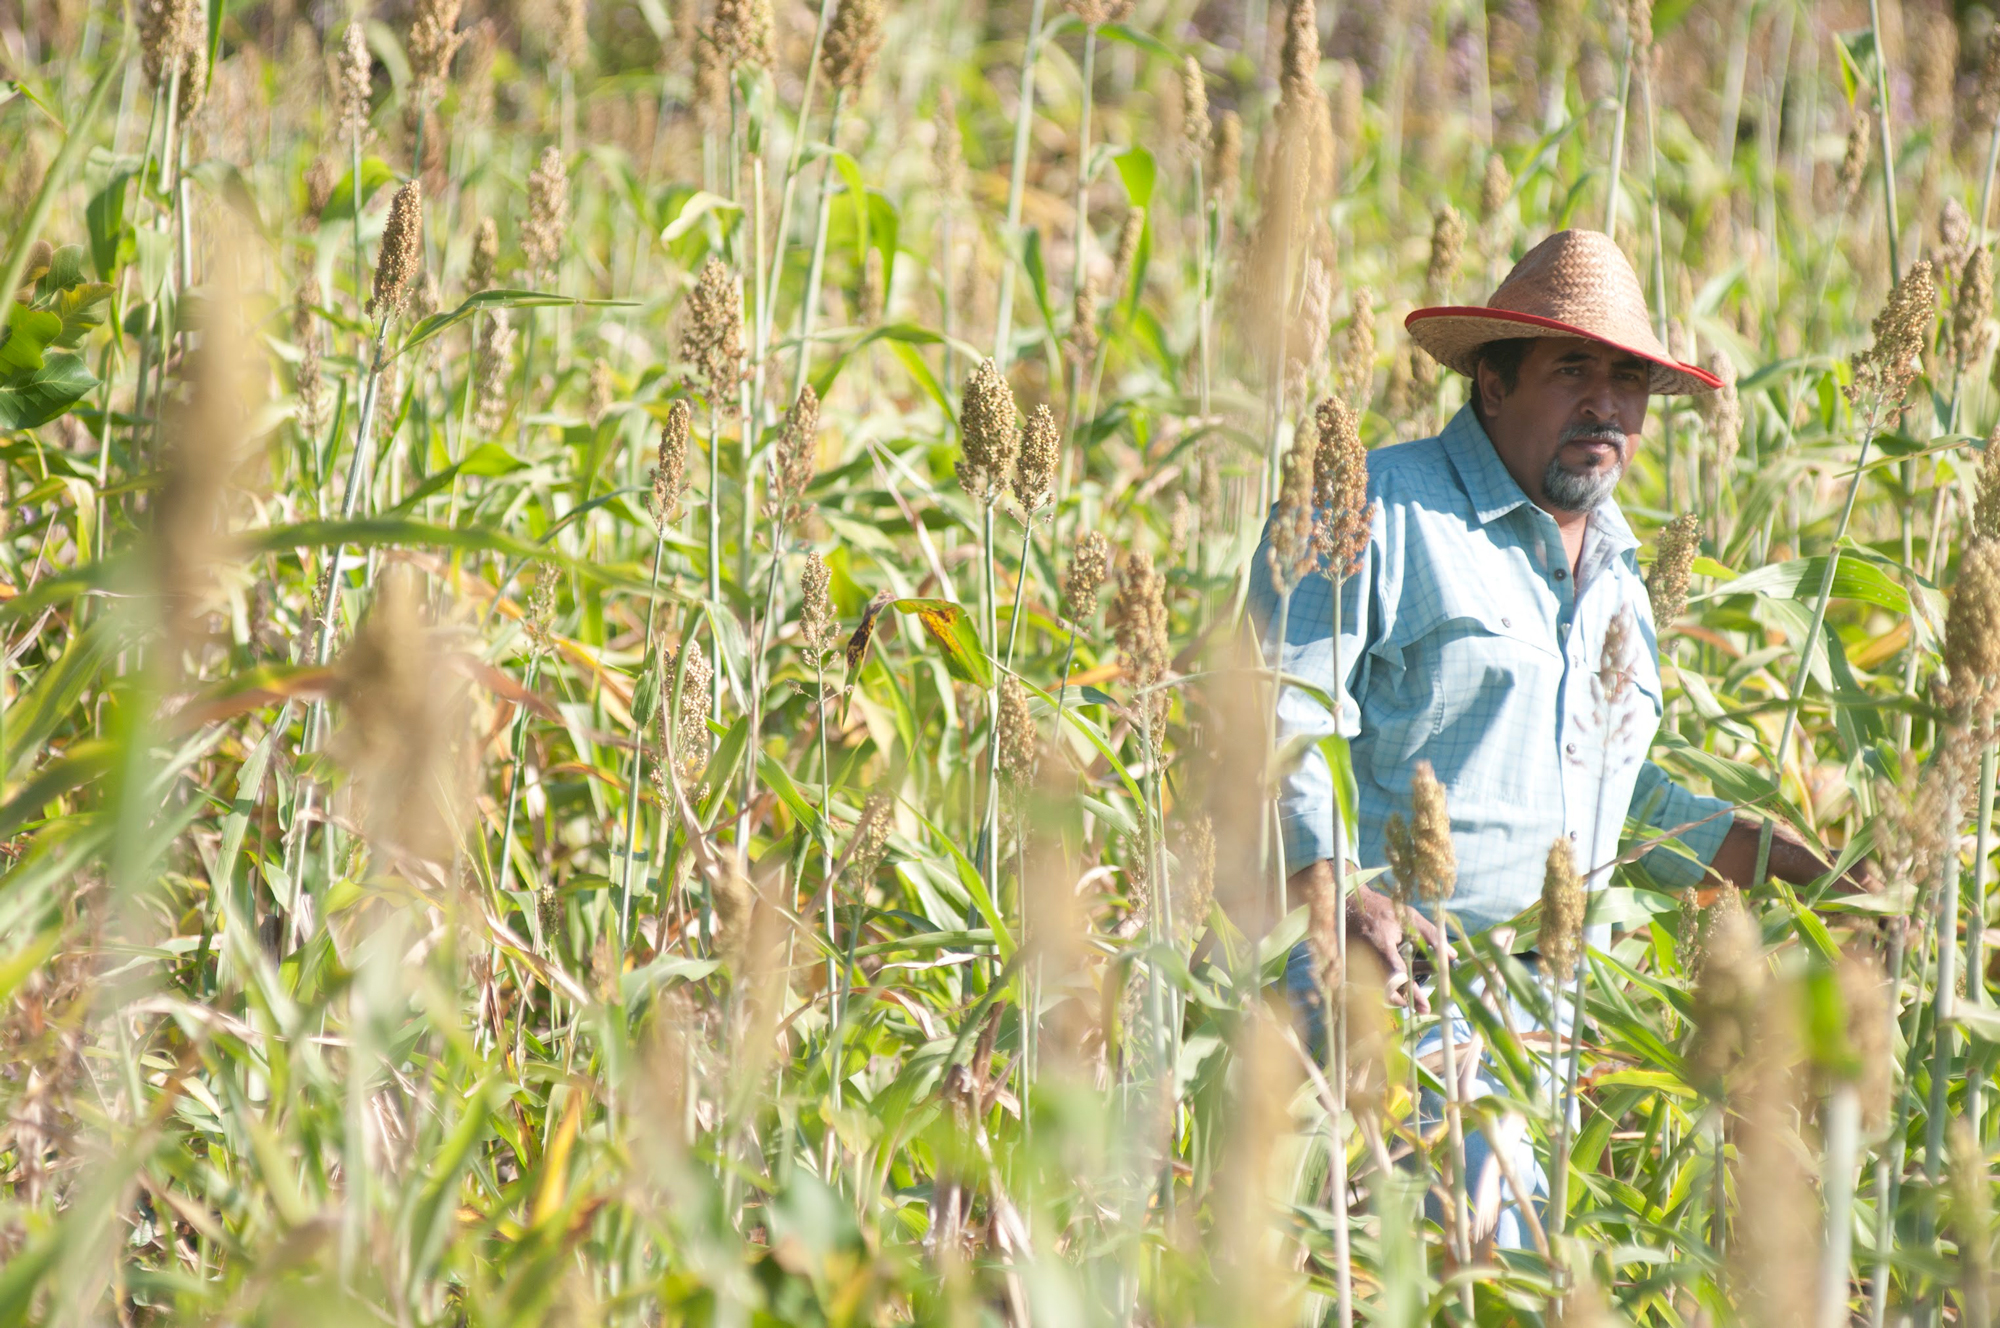 Man in cowboy hat and light blue shirt stands in a corn field